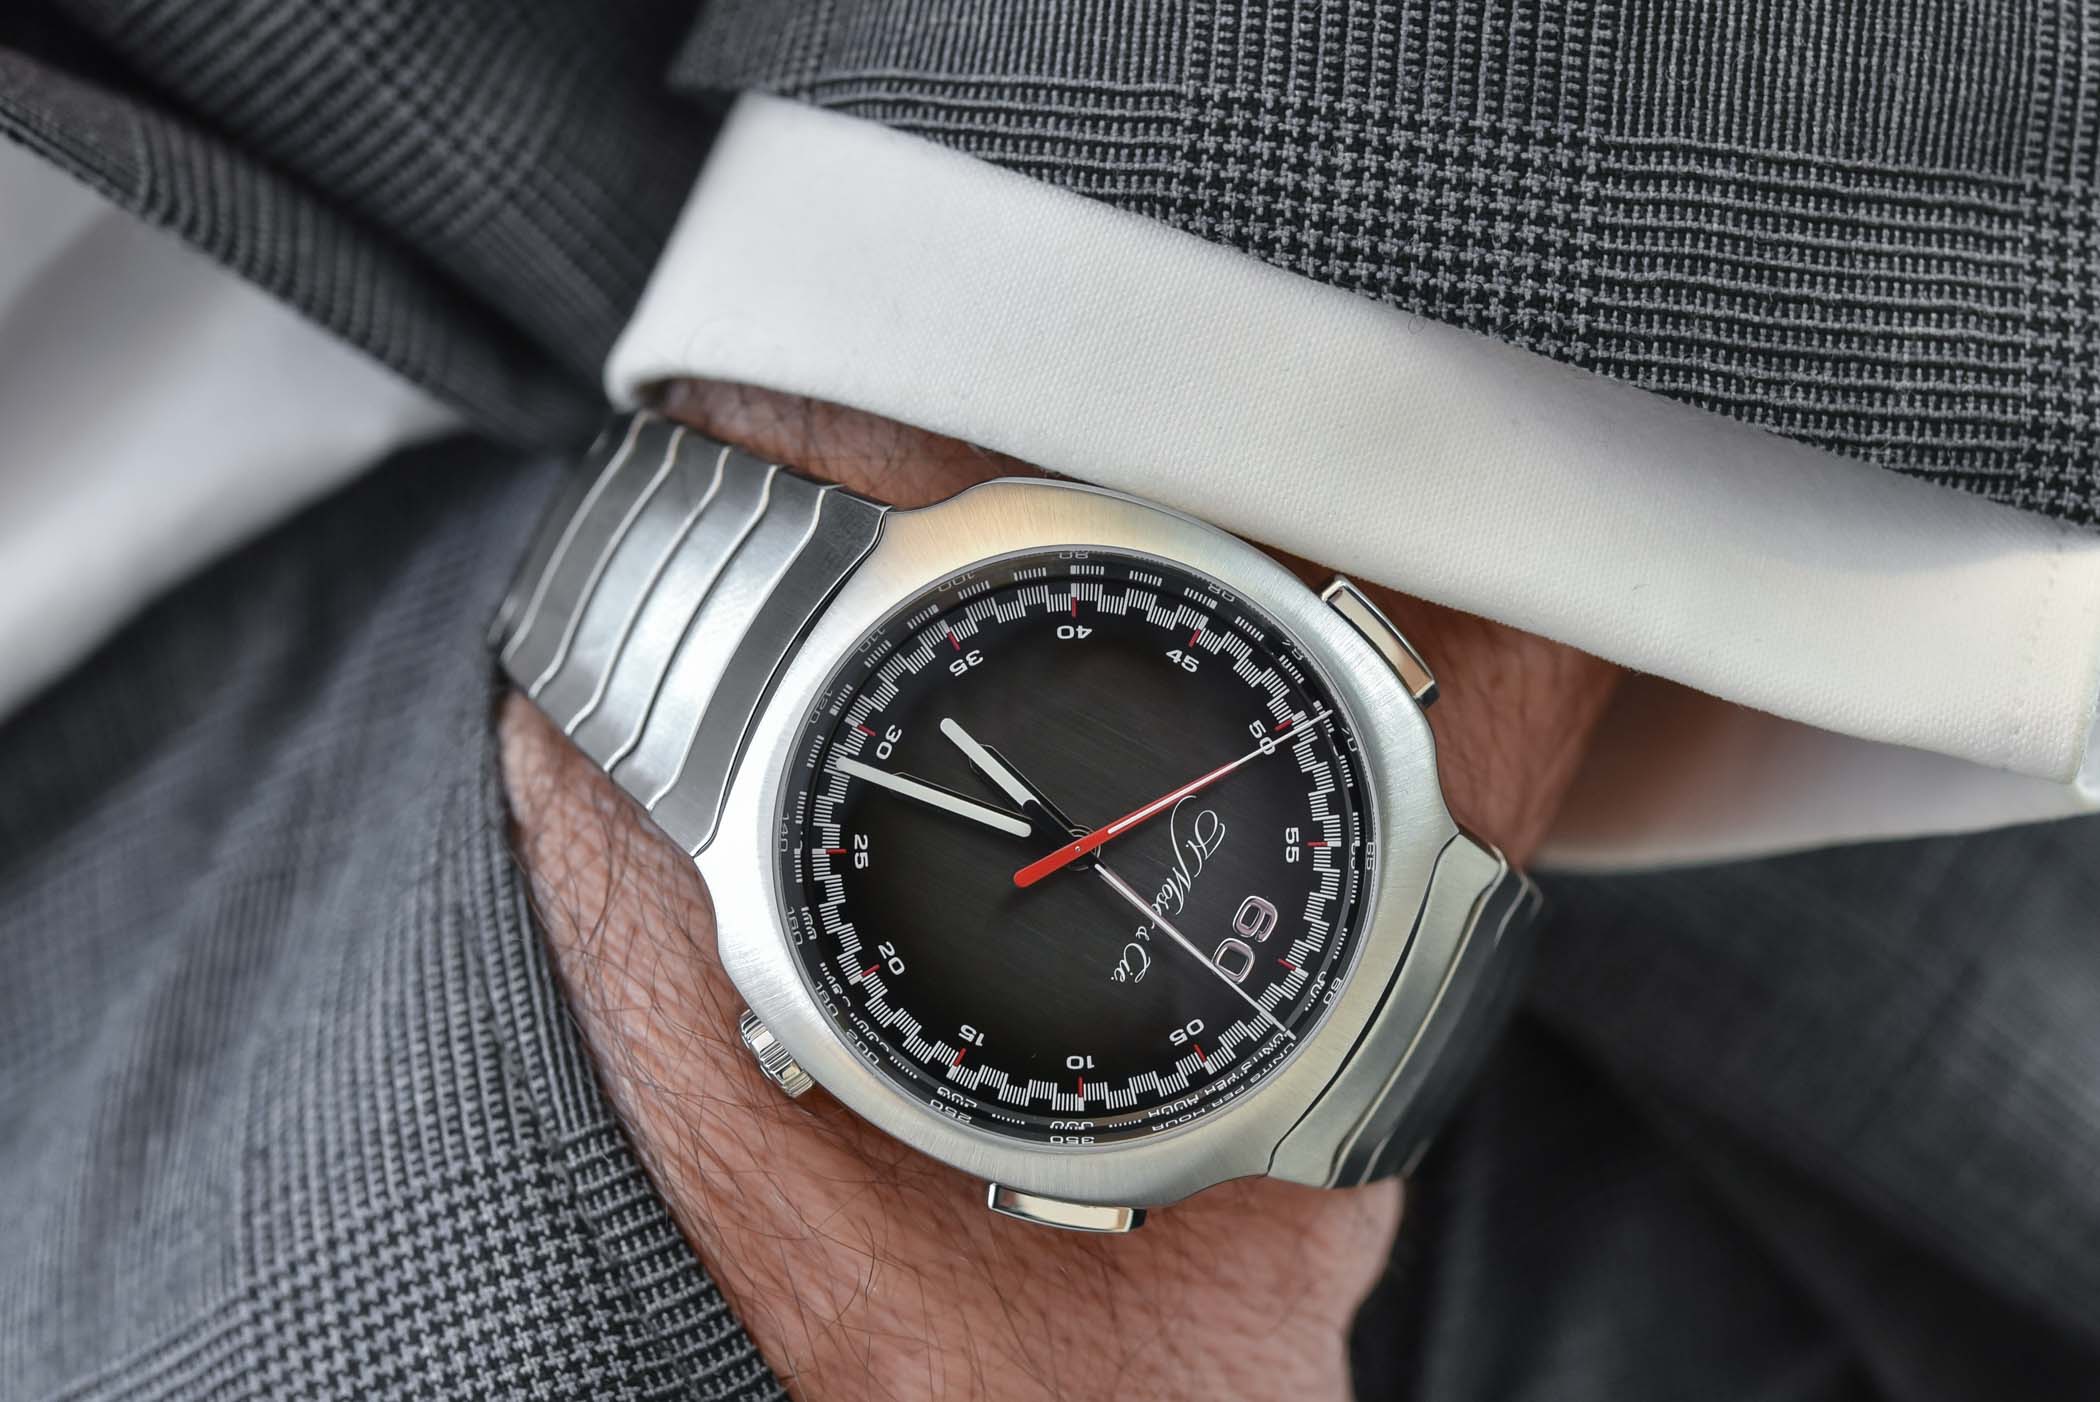 H. Moser & Cie Streamliner Flyback Chronograph Automatic